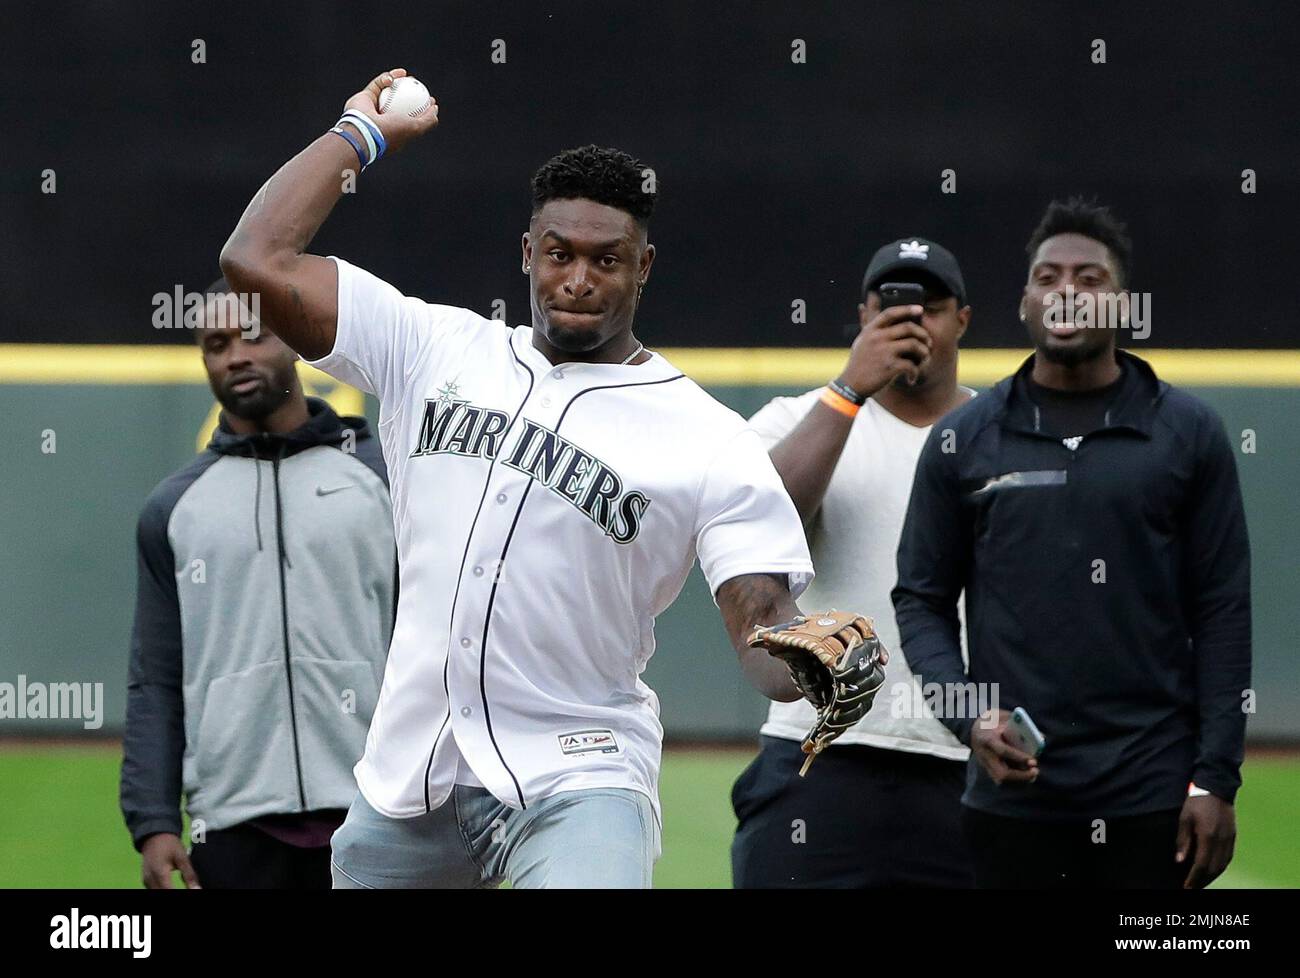 Seattle Seahawks rookie wide receiver DK Metcalf throws out the first pitch  at a baseball game between the Seattle Mariners and the Baltimore Orioles,  as other rookies from the NFL football team